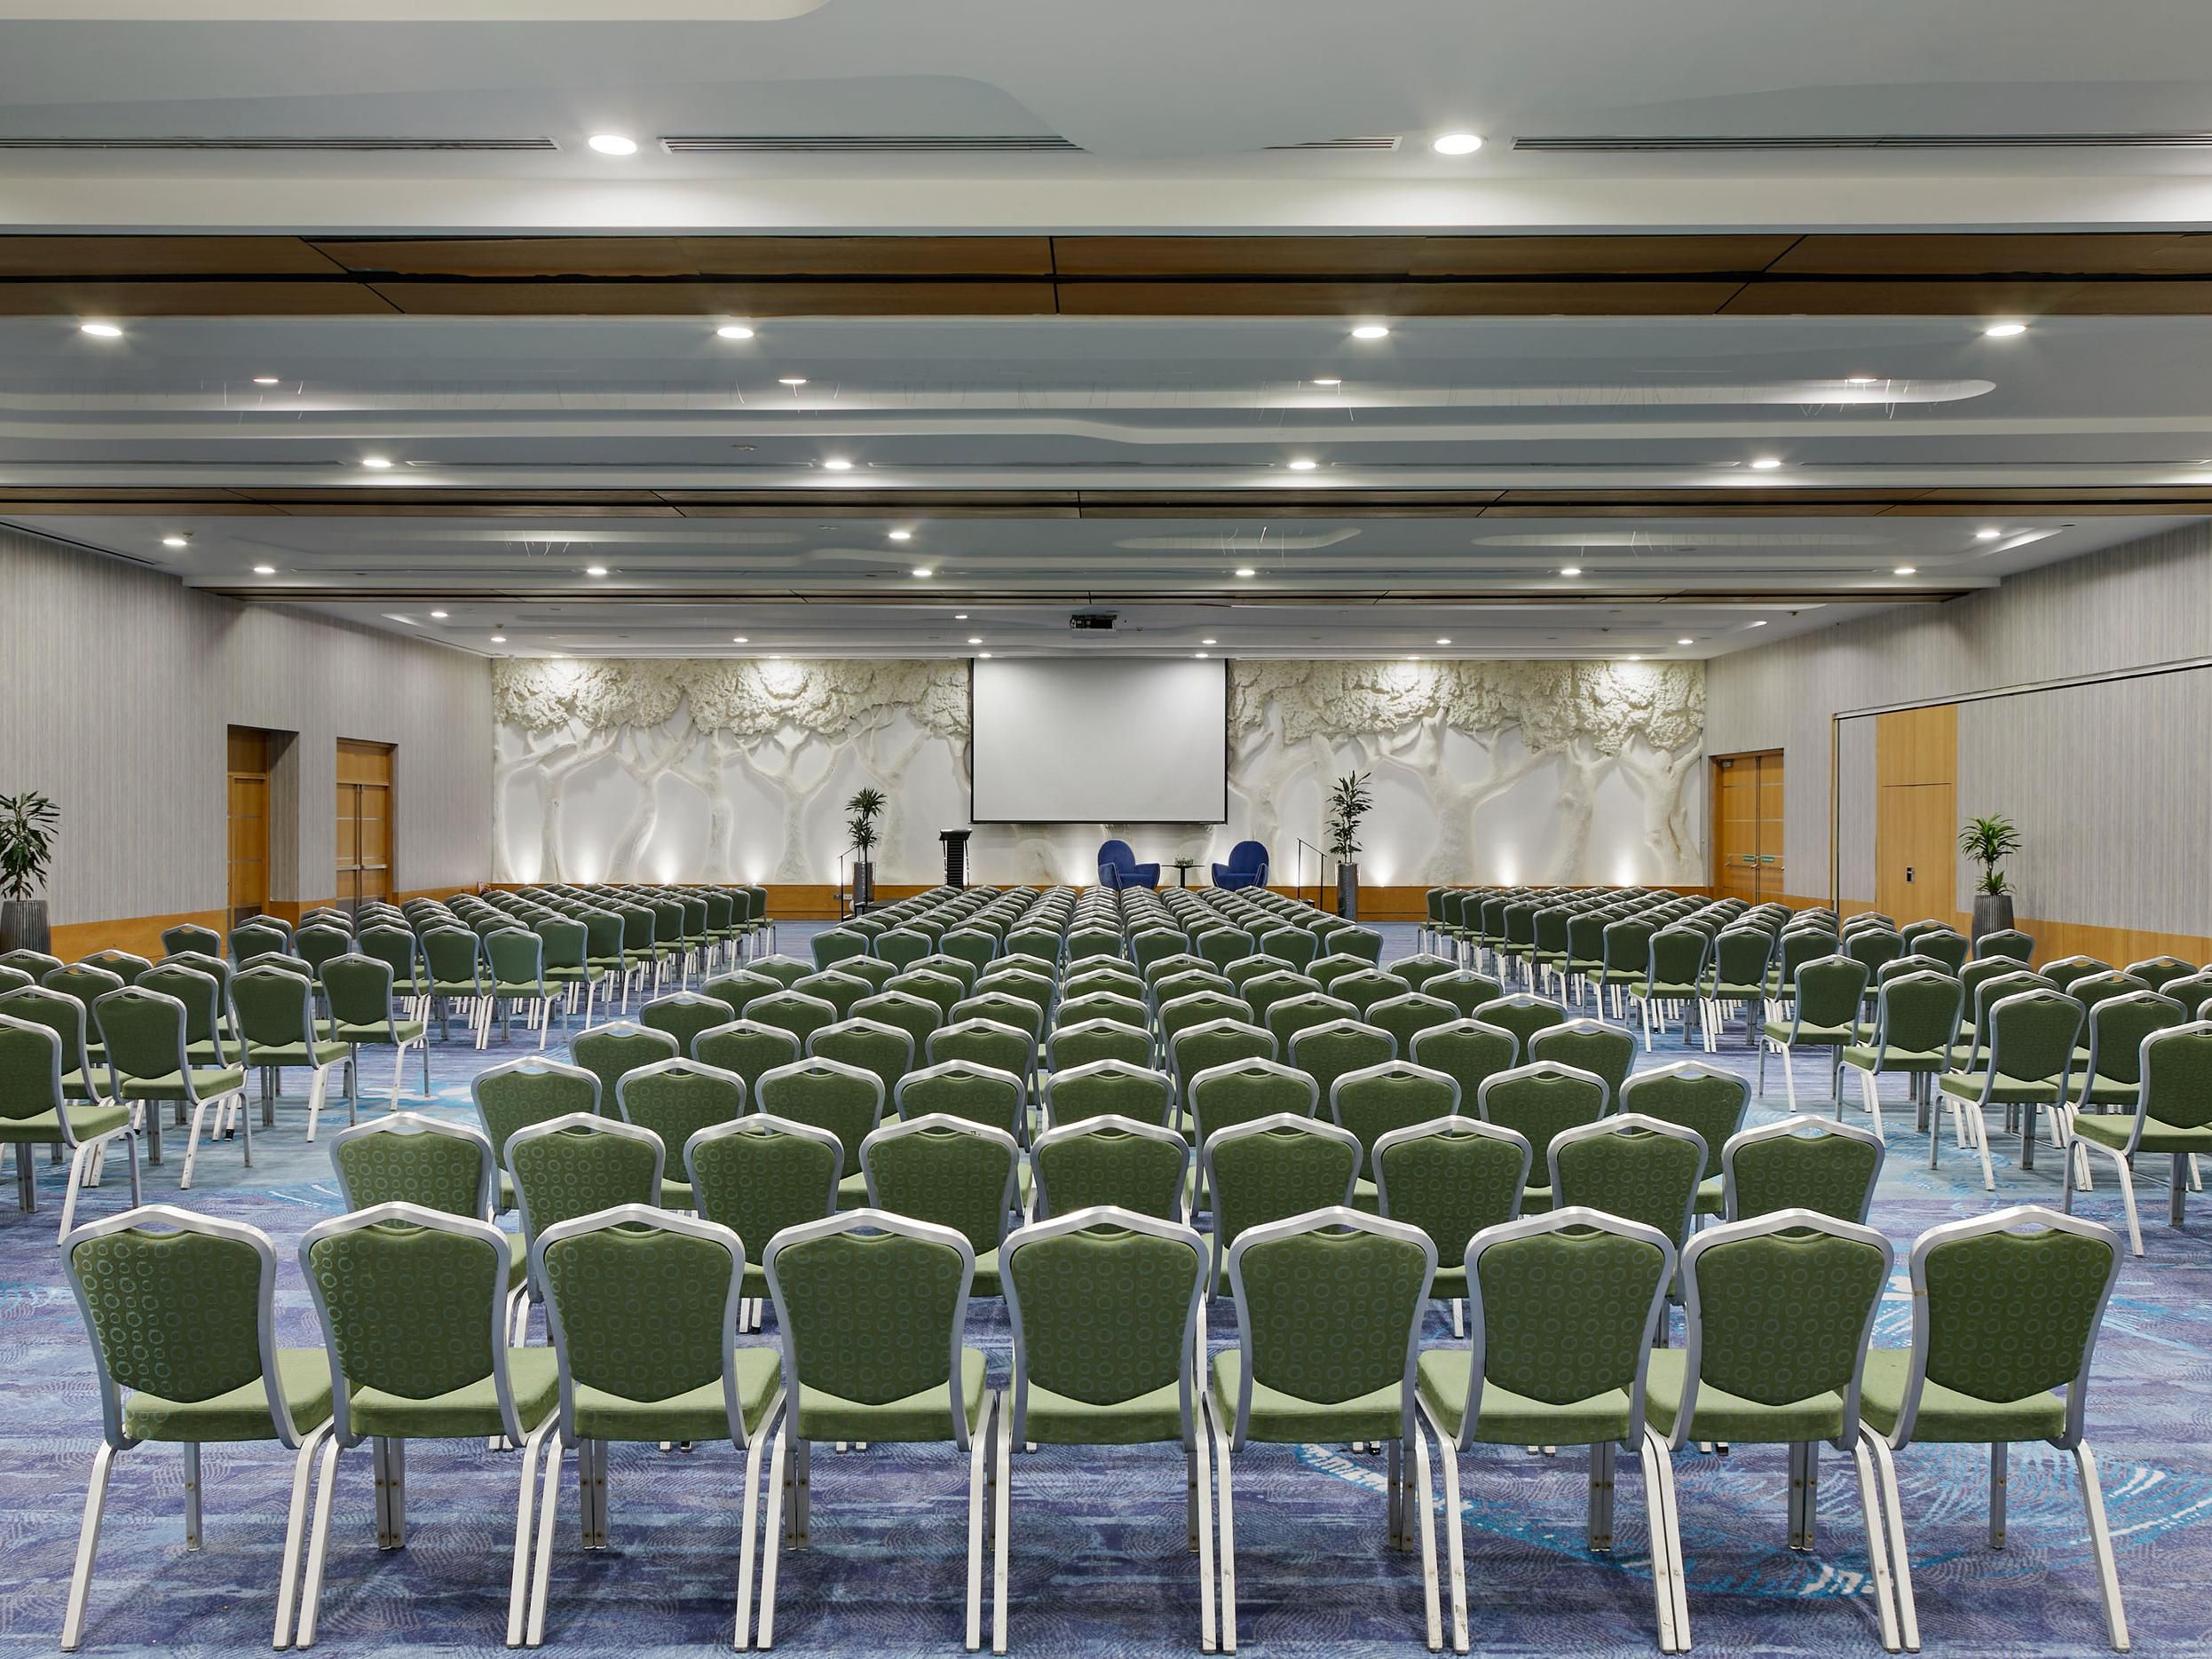 The Crowne Plaza Dublin Airport boasts 25 meeting rooms and event suites for both social and corporate events such as Conferences, Exhibitions, Gala Dinners, Award Ceremonies and more. Our professional and experienced team can assist with all of the details from inspiring menus and refreshments to customised room layouts and configurations.